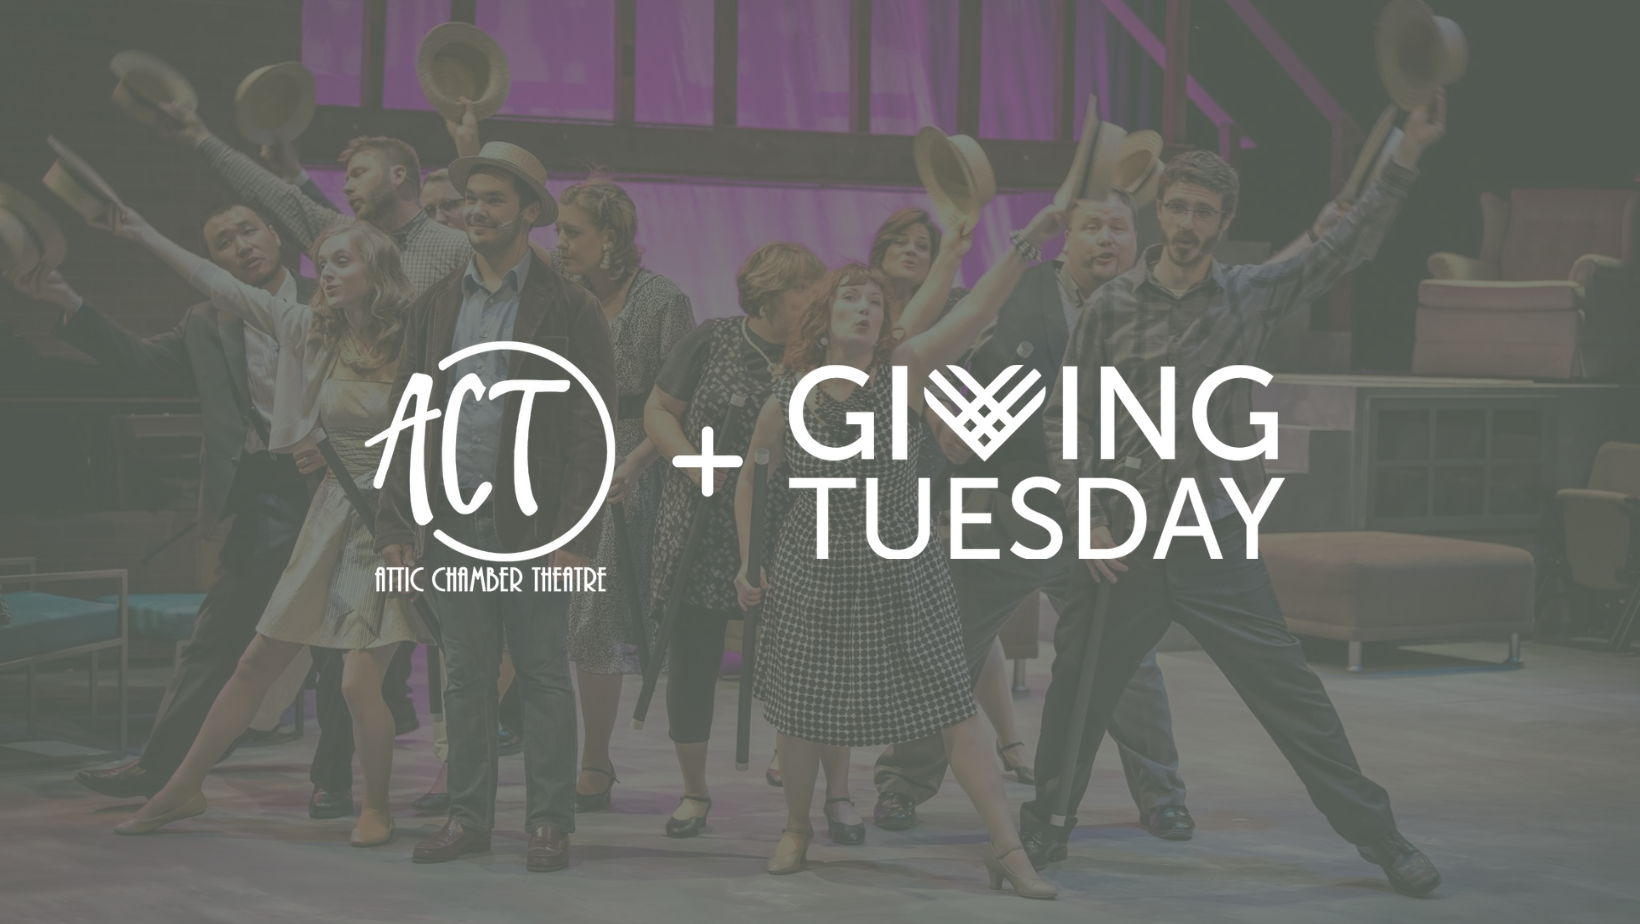 Attic Theatre and Giving Tuesday